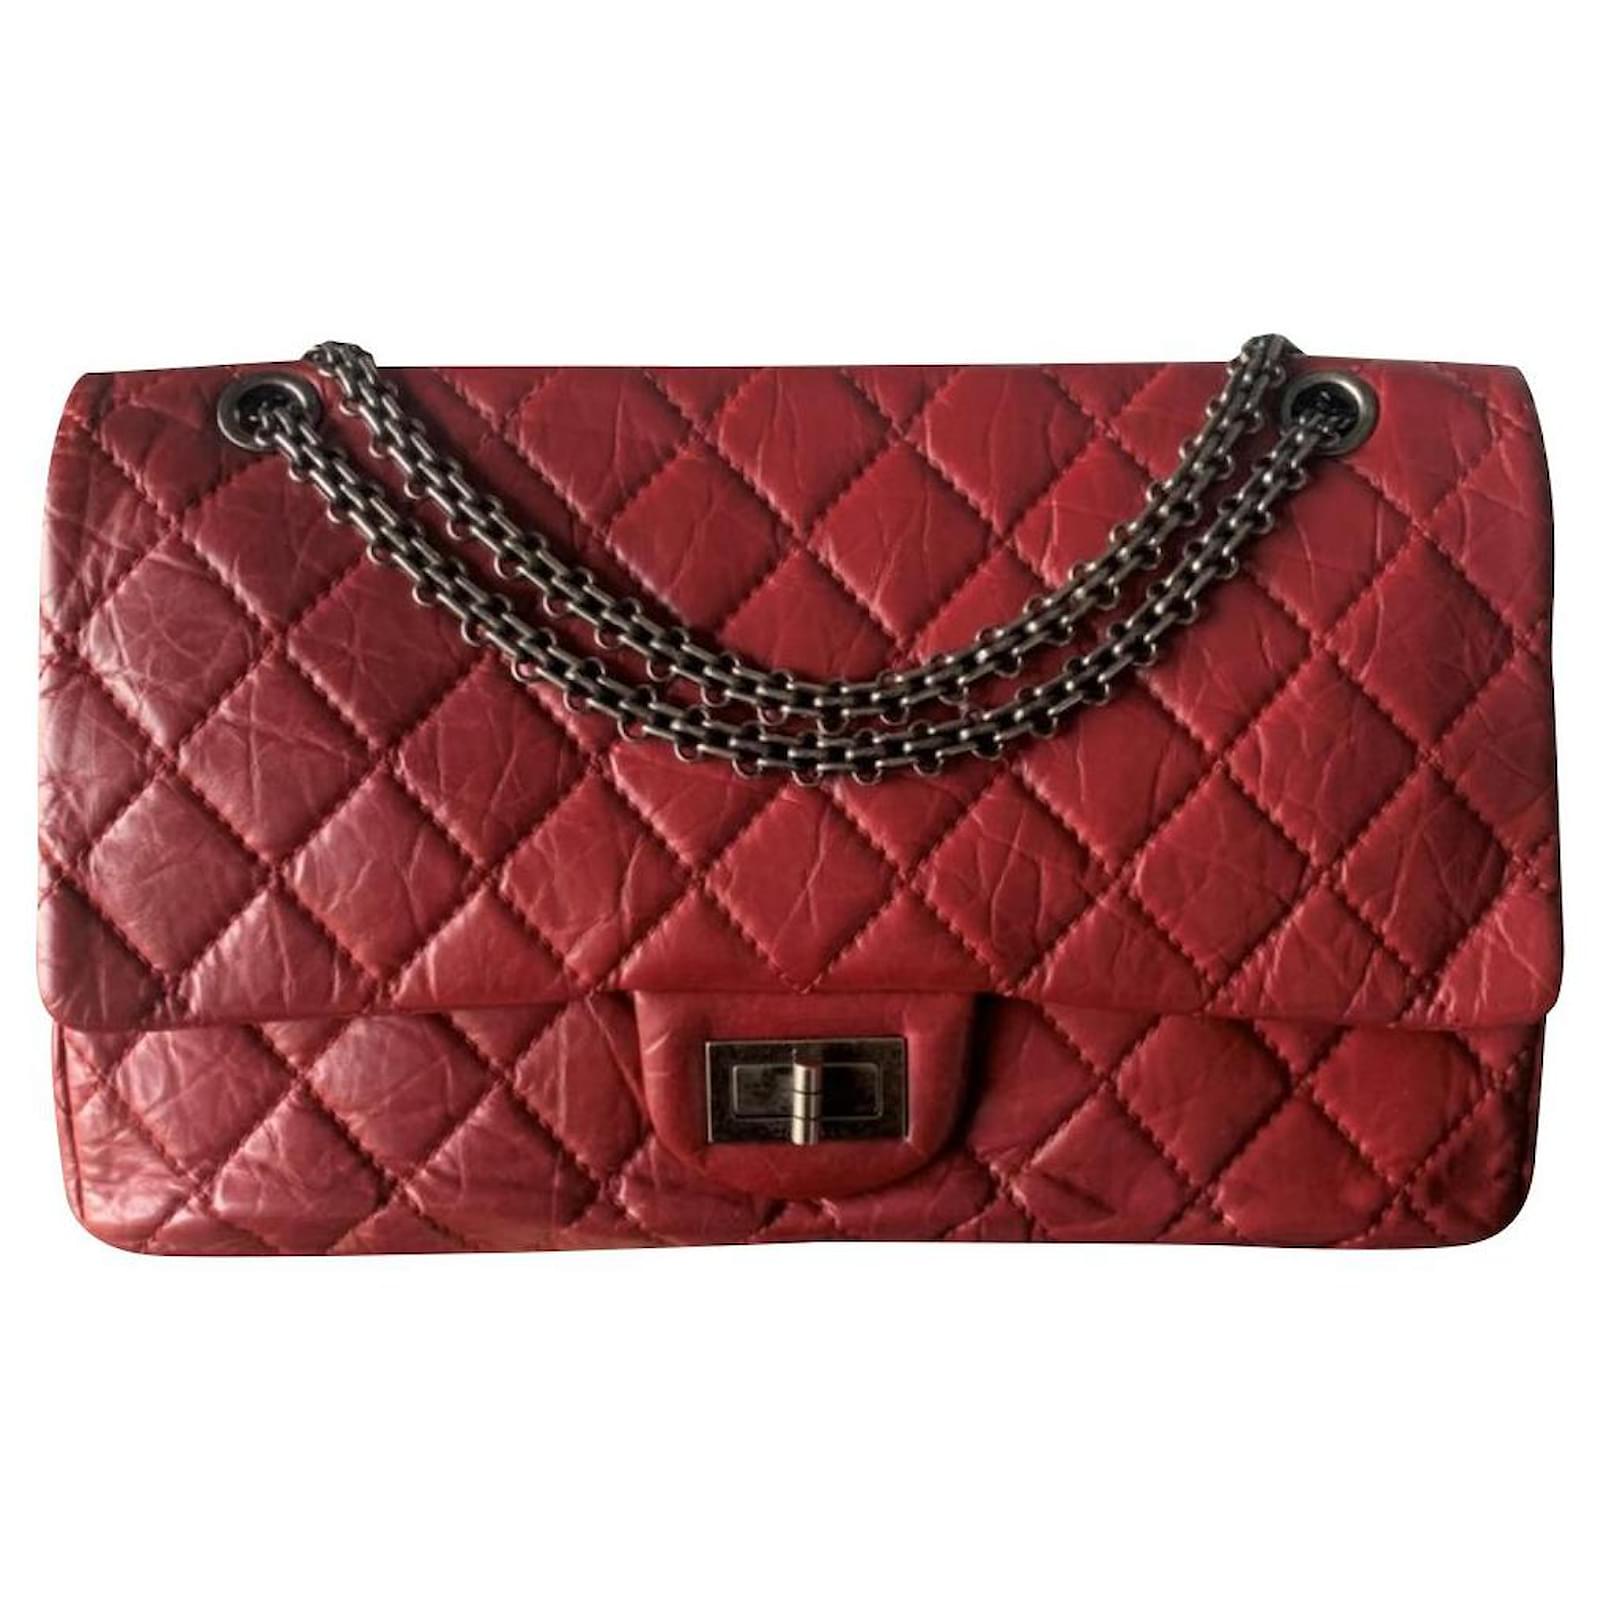 Sublime Chanel bag 2,55 Reissue model 227 timeless classic leather